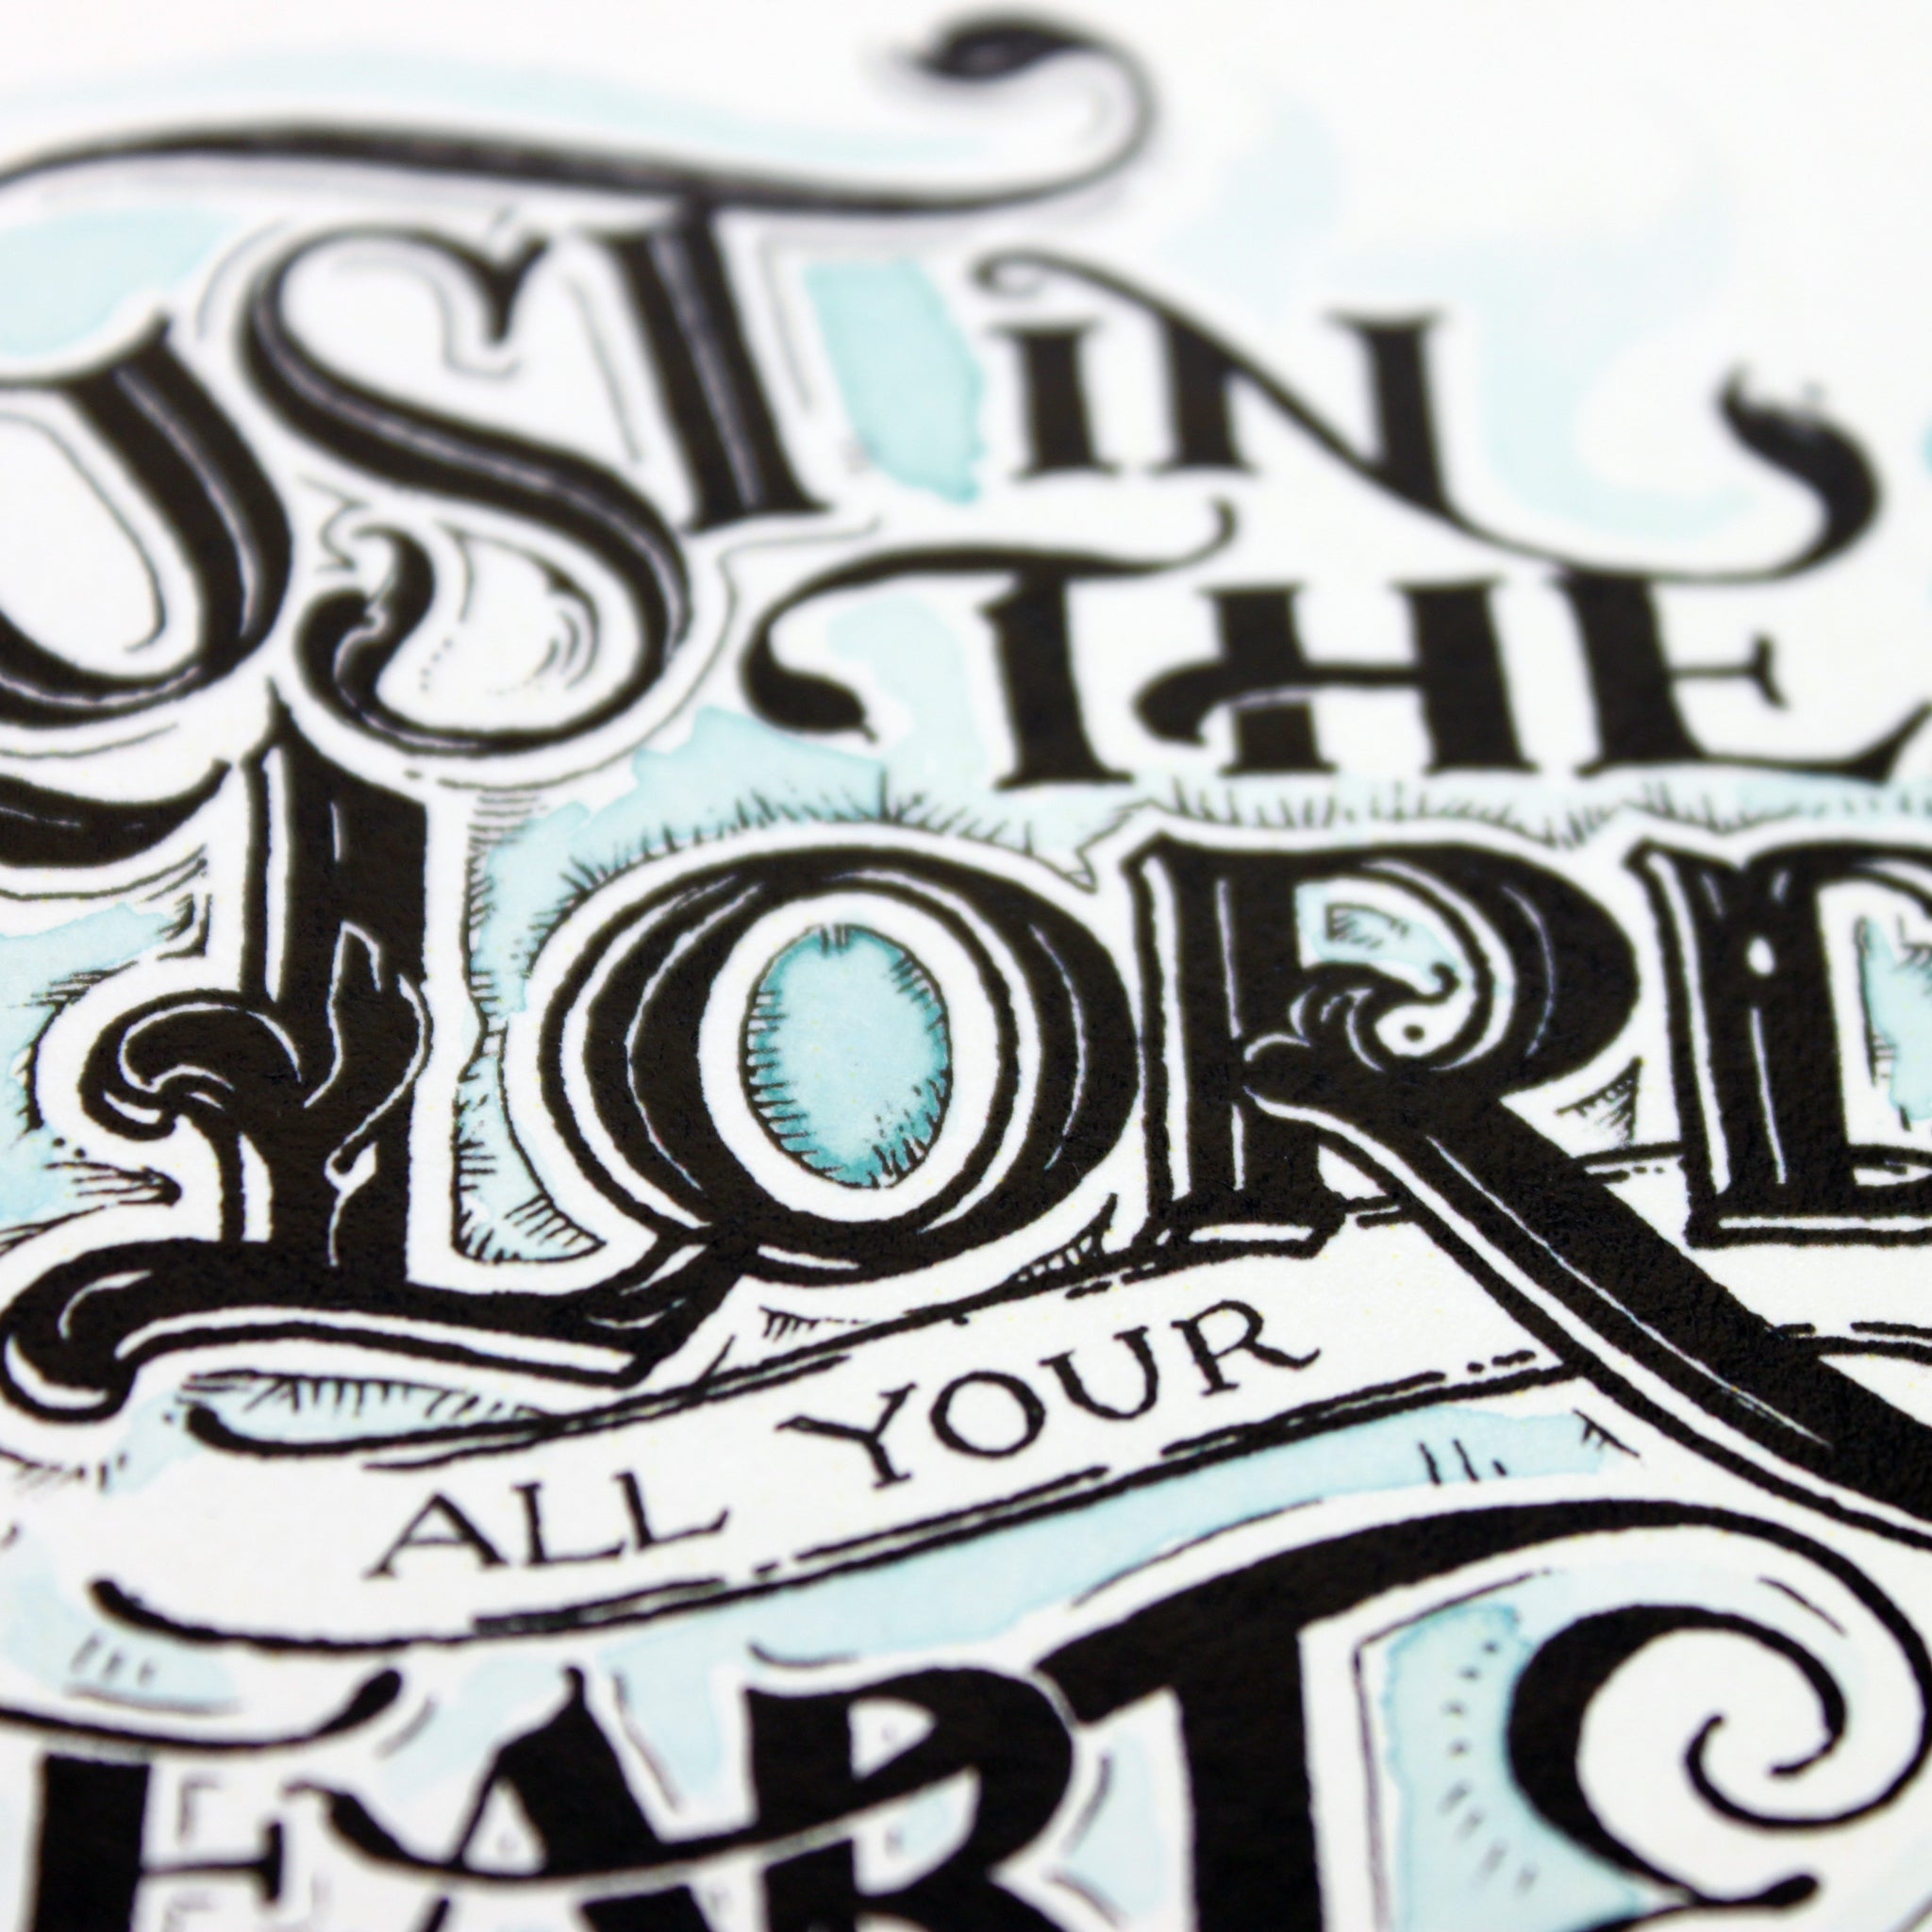 Trust in the Lord - Proverbs 3:5 art print - A4 handlettering print